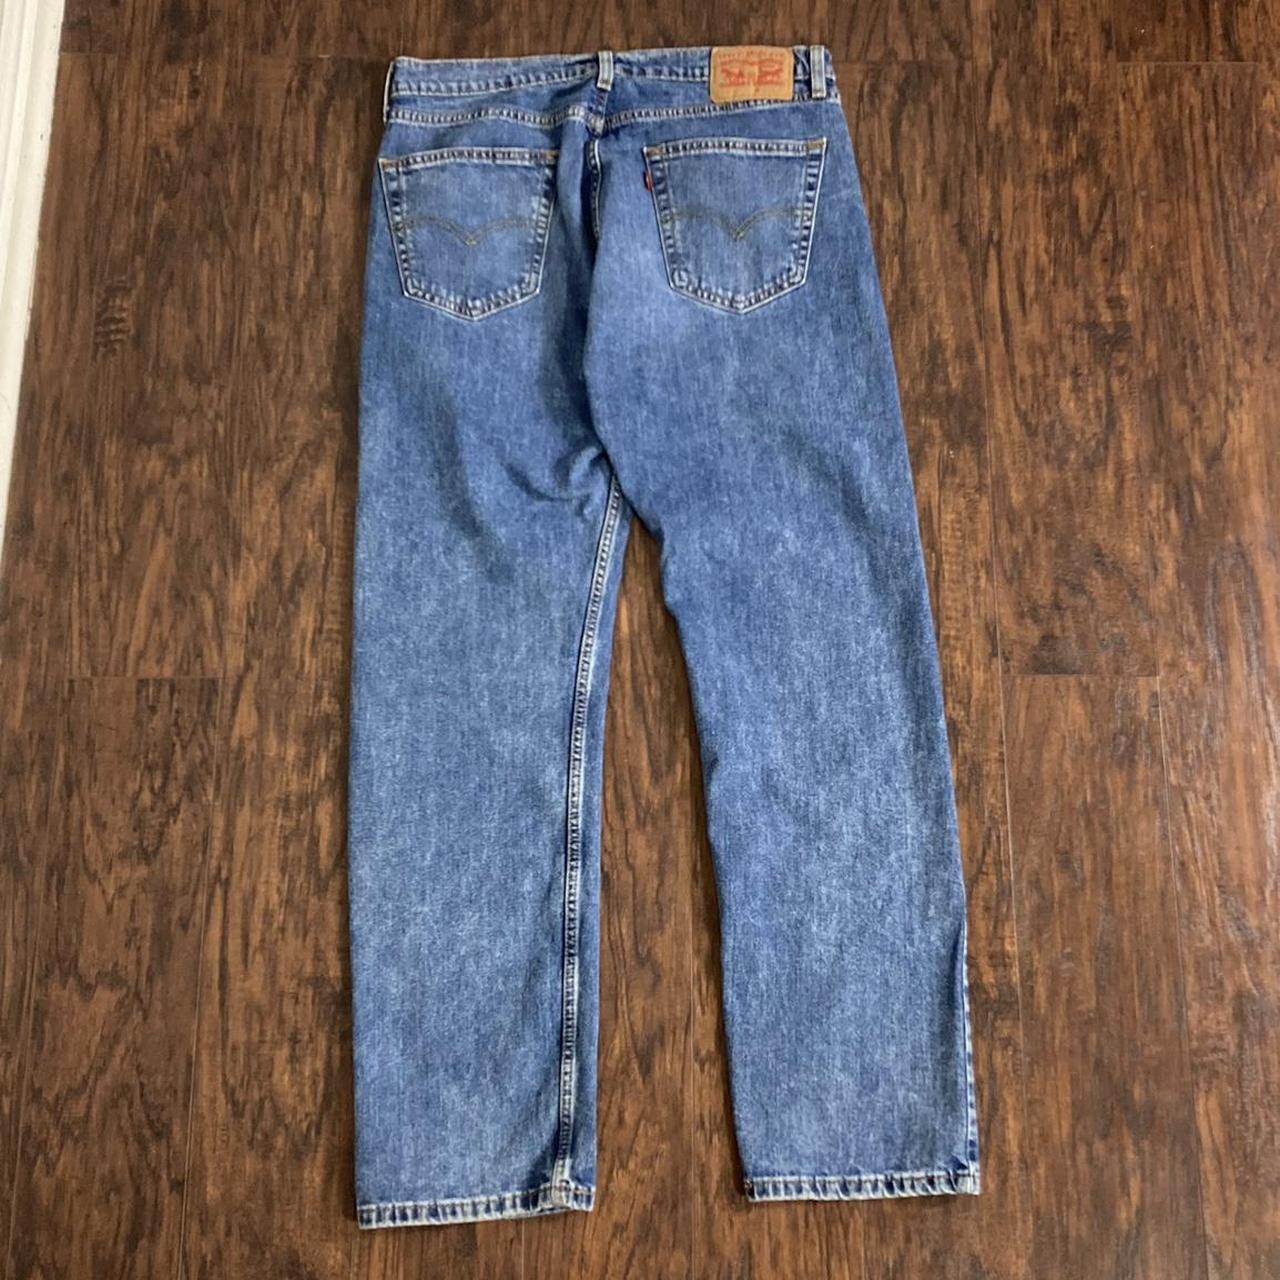 Levi’s 505 Jeans In good condition, no notable... - Depop